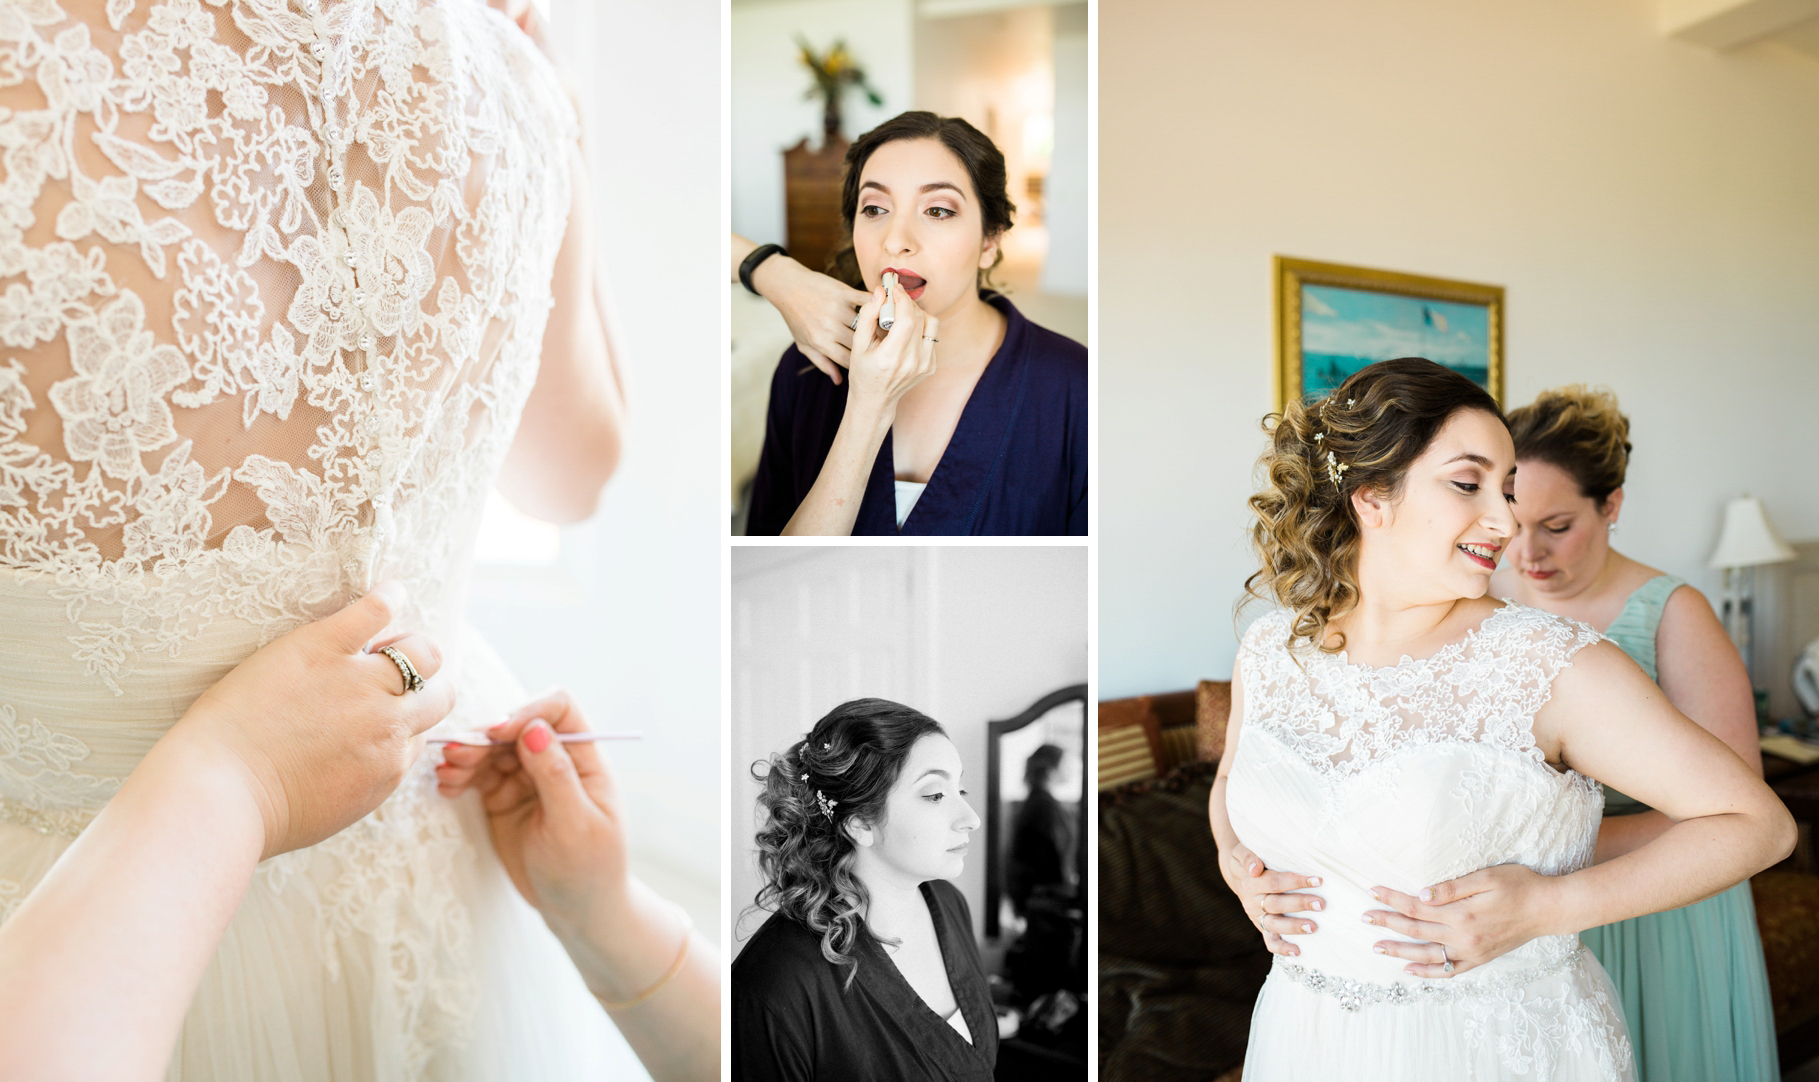 4-getting-ready-bridal-gown-dress-edmonds-seattle-wedding-photographer-olympics-waterfront